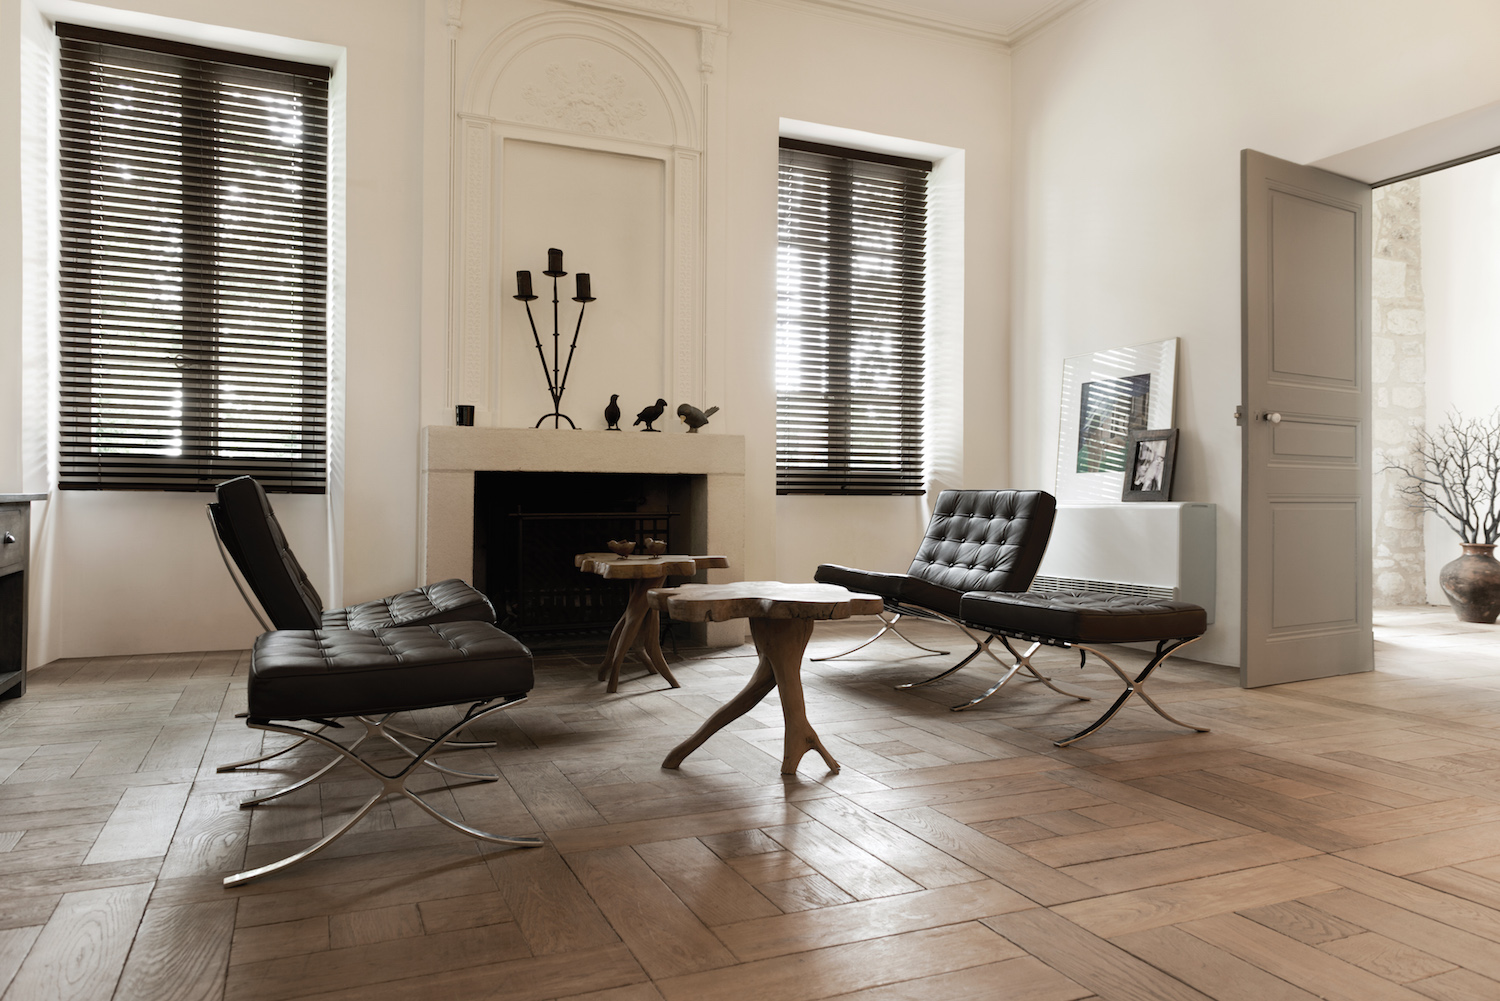 Wood blinds are an elegant solution to natural light problems.